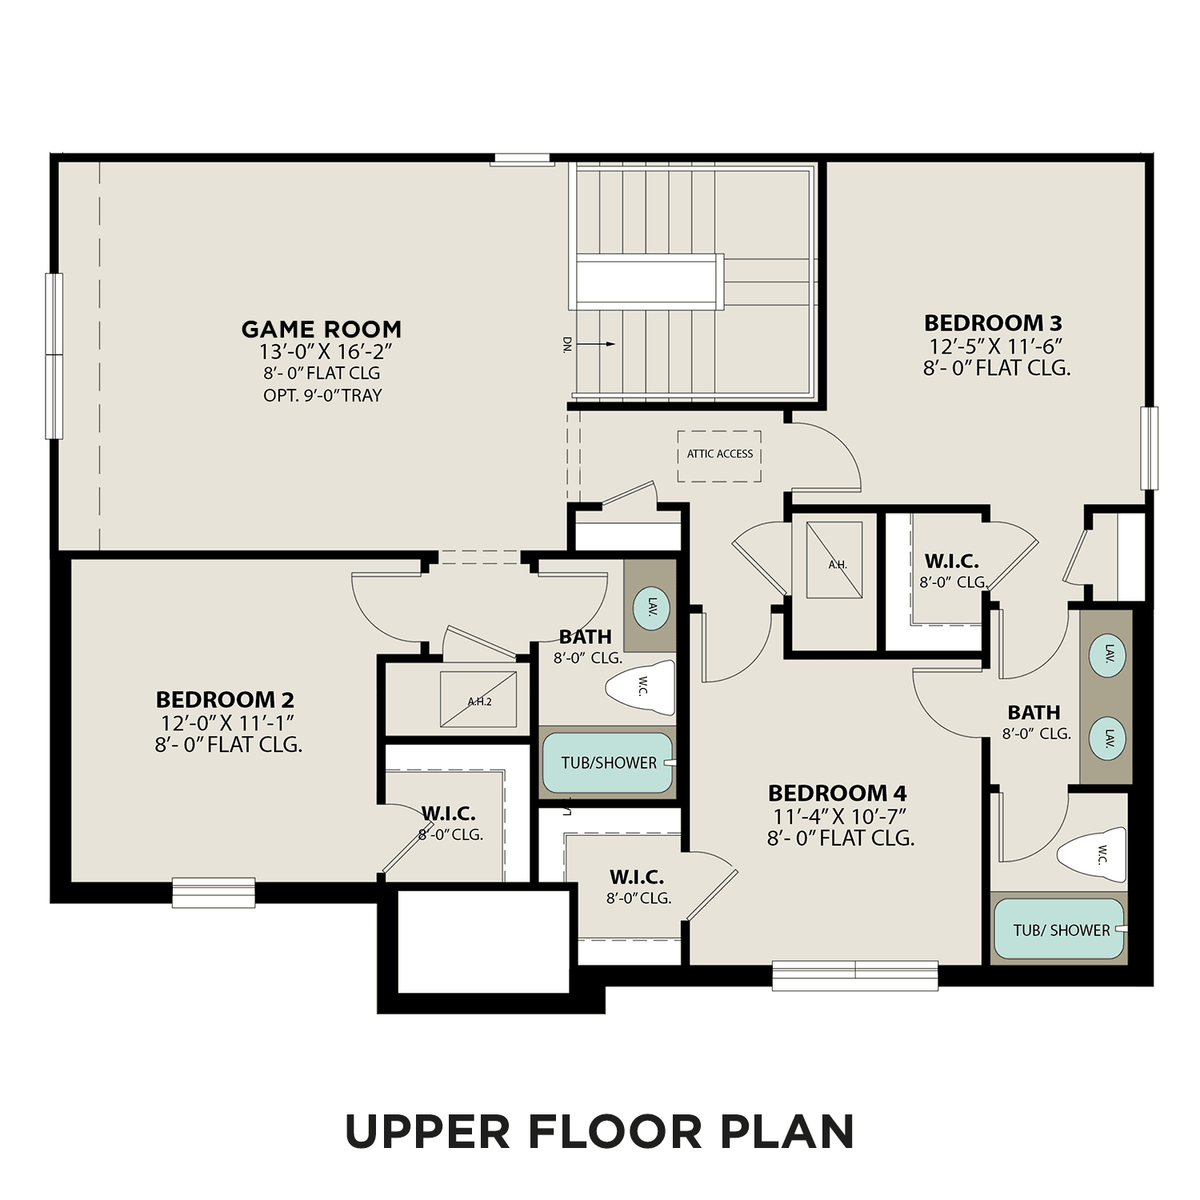 2 - The Sequoia A with 3-Car Garage buildable floor plan layout in Davidson Homes' Sunterra community.